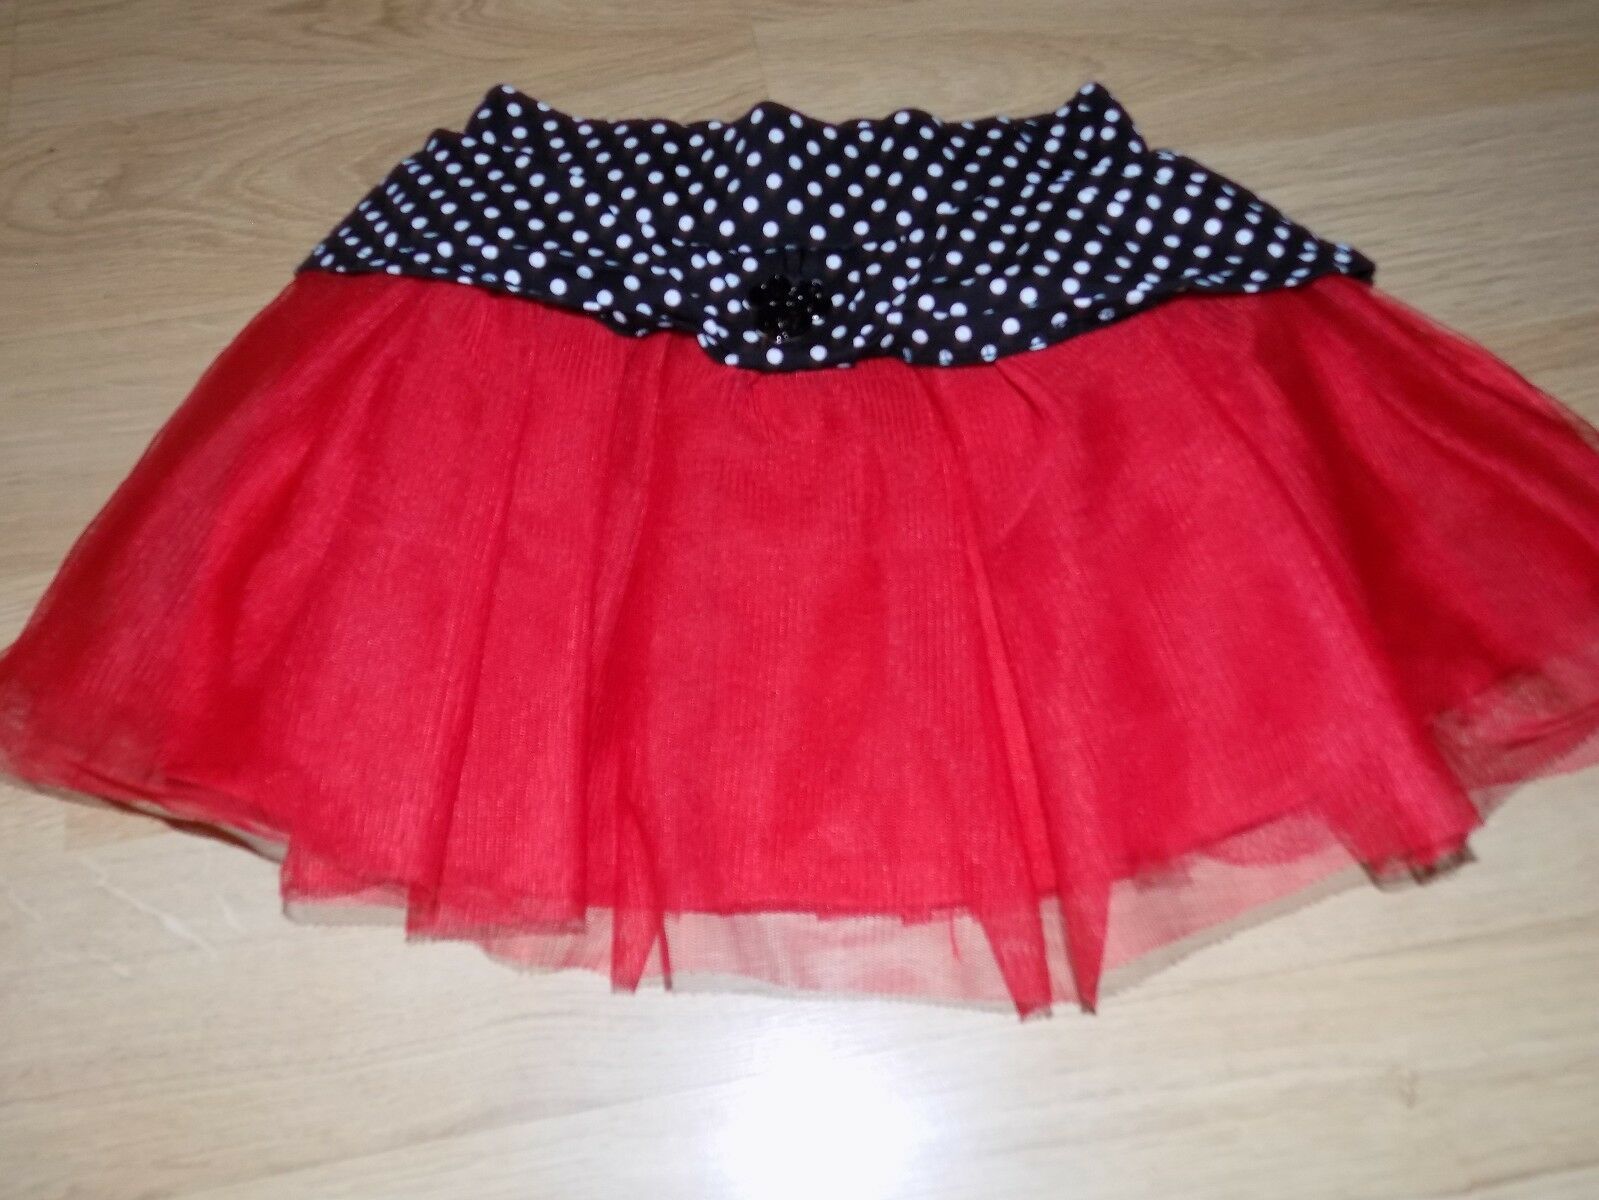 Primary image for Size 6 Disney Minnie Mouse Red Tulle Skirt Black White Polka Dot Waist GUC